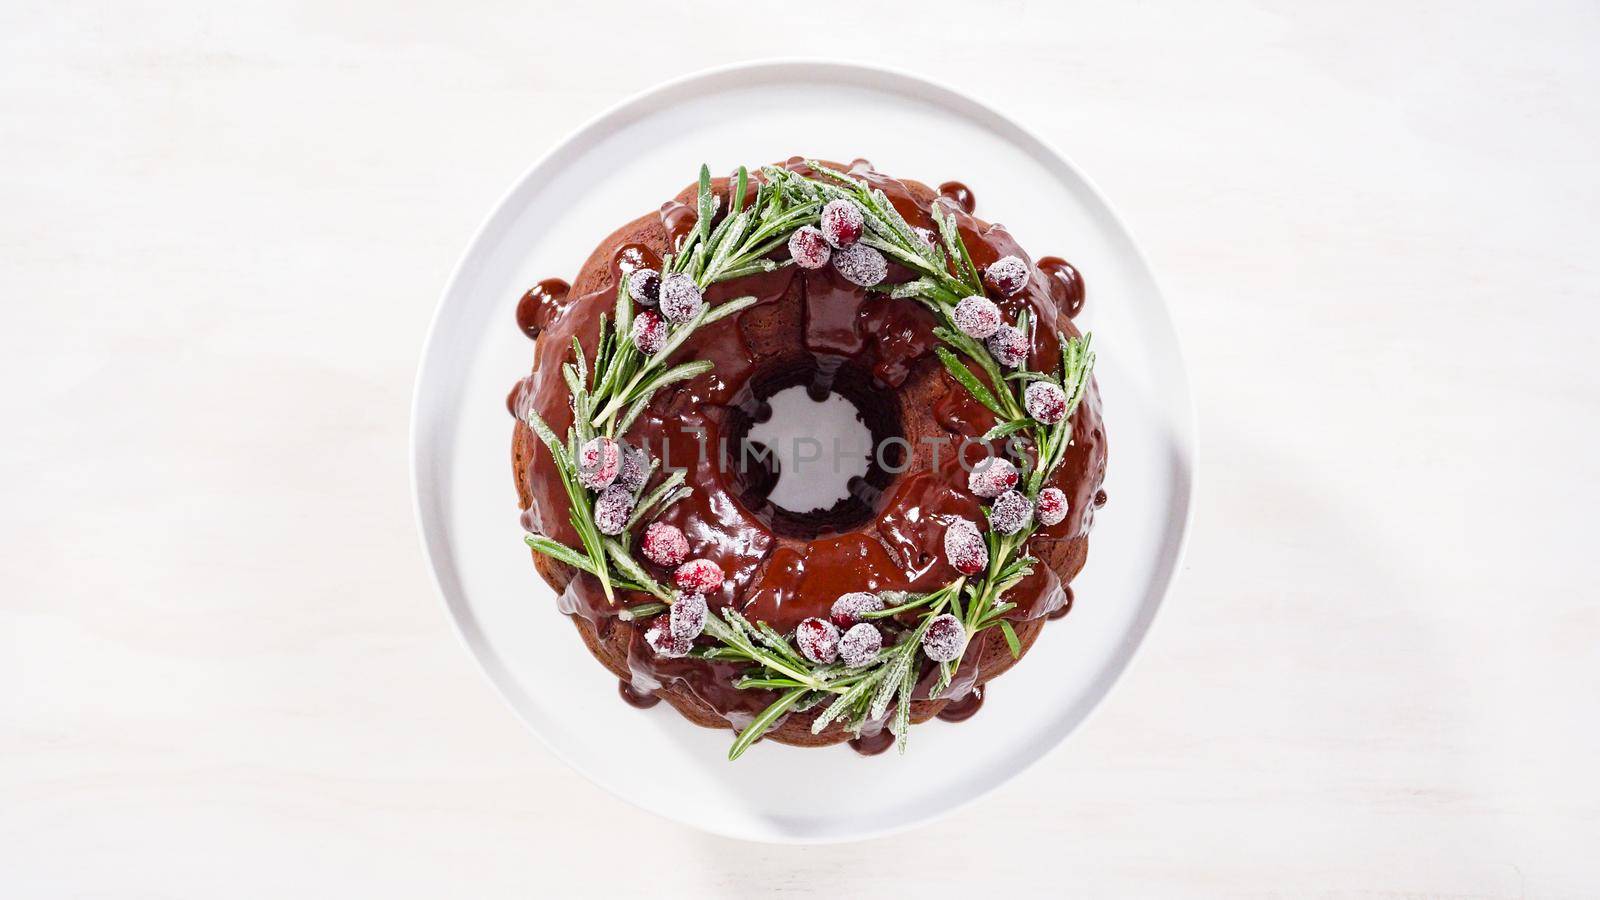 Step by step. Flat lay. Chocolate bundt cake with chocolate frosting decorated with fresh cranberries and rosemary covered in a white sugar.